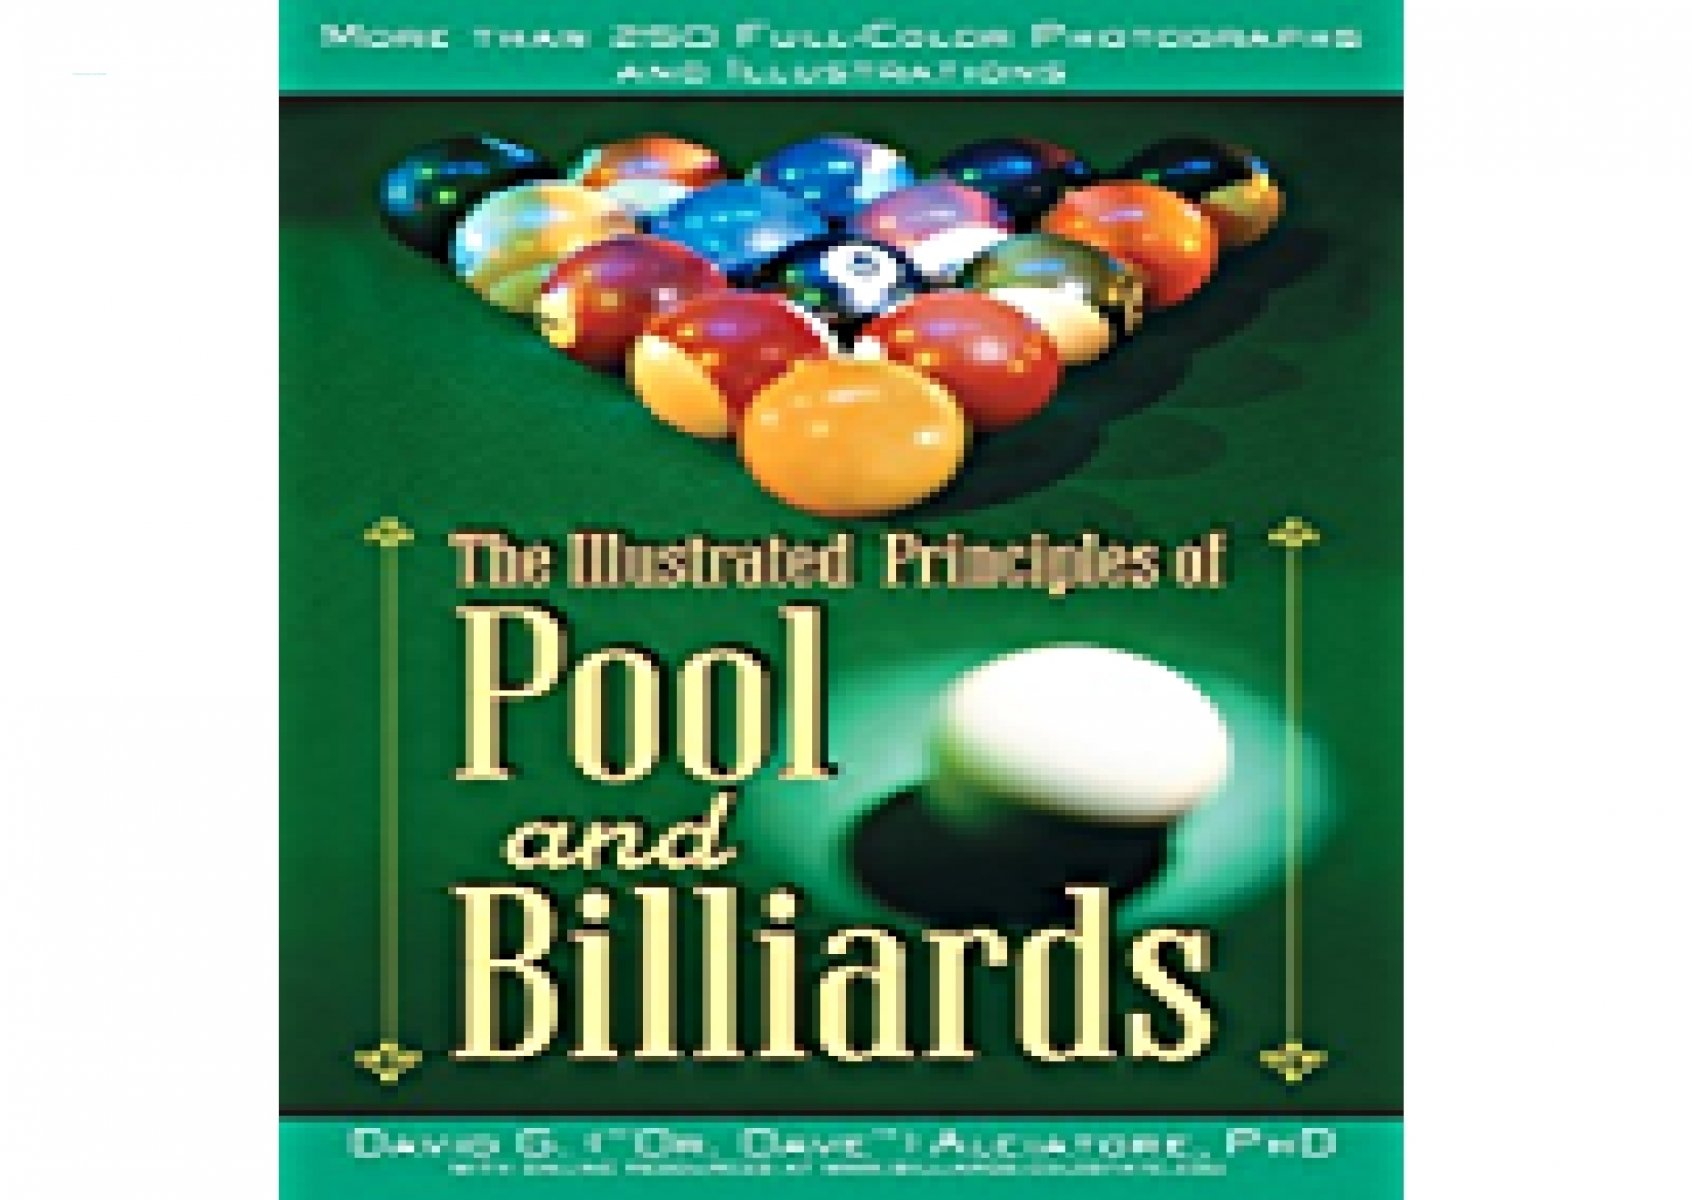 the illustrated principles of pool and billiards free download